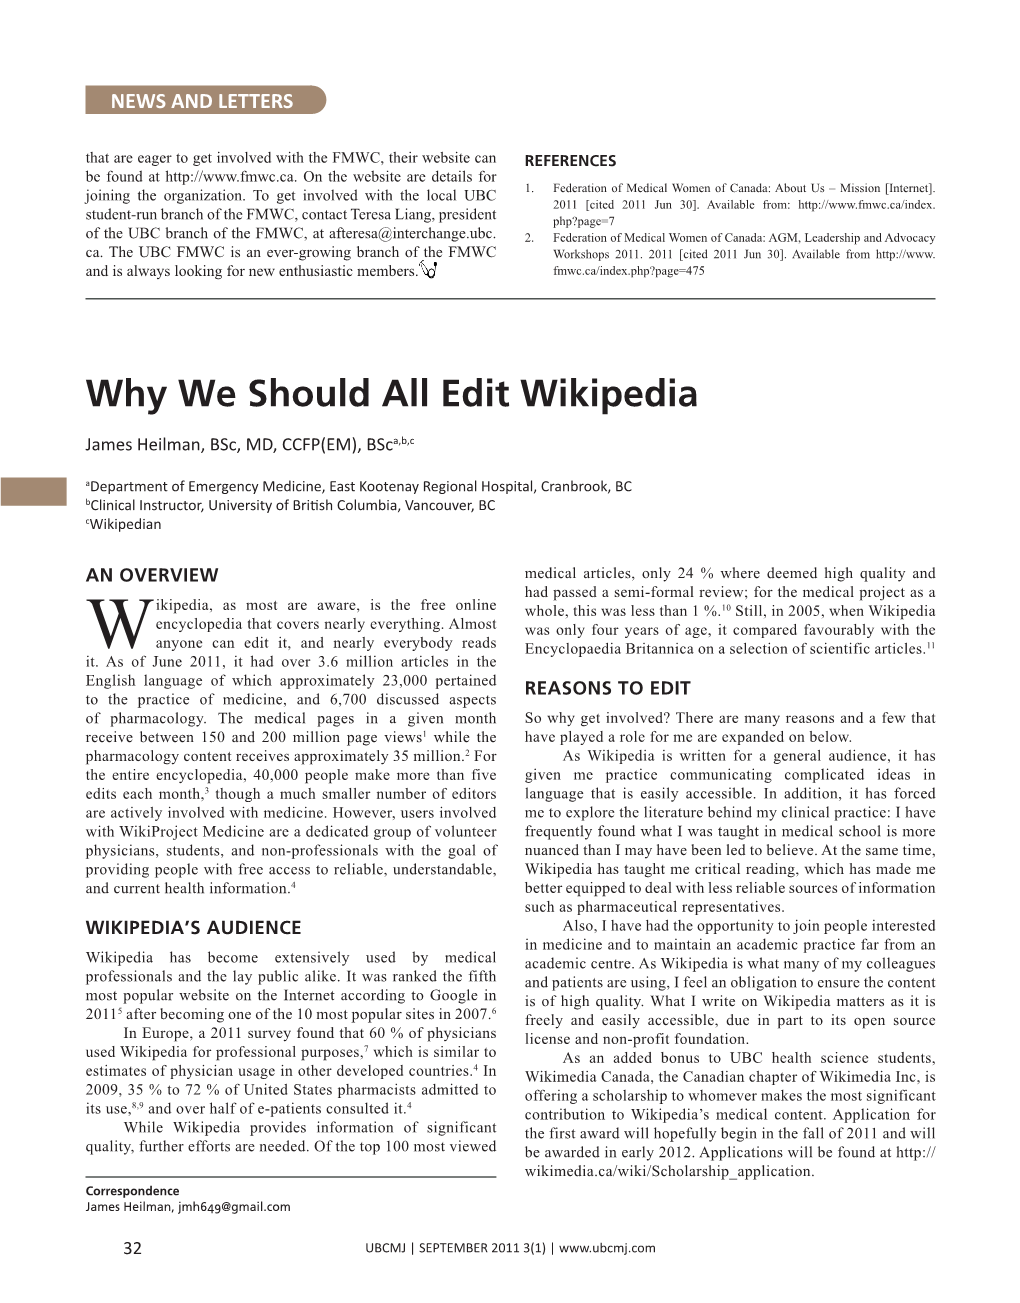 Why We Should All Edit Wikipedia